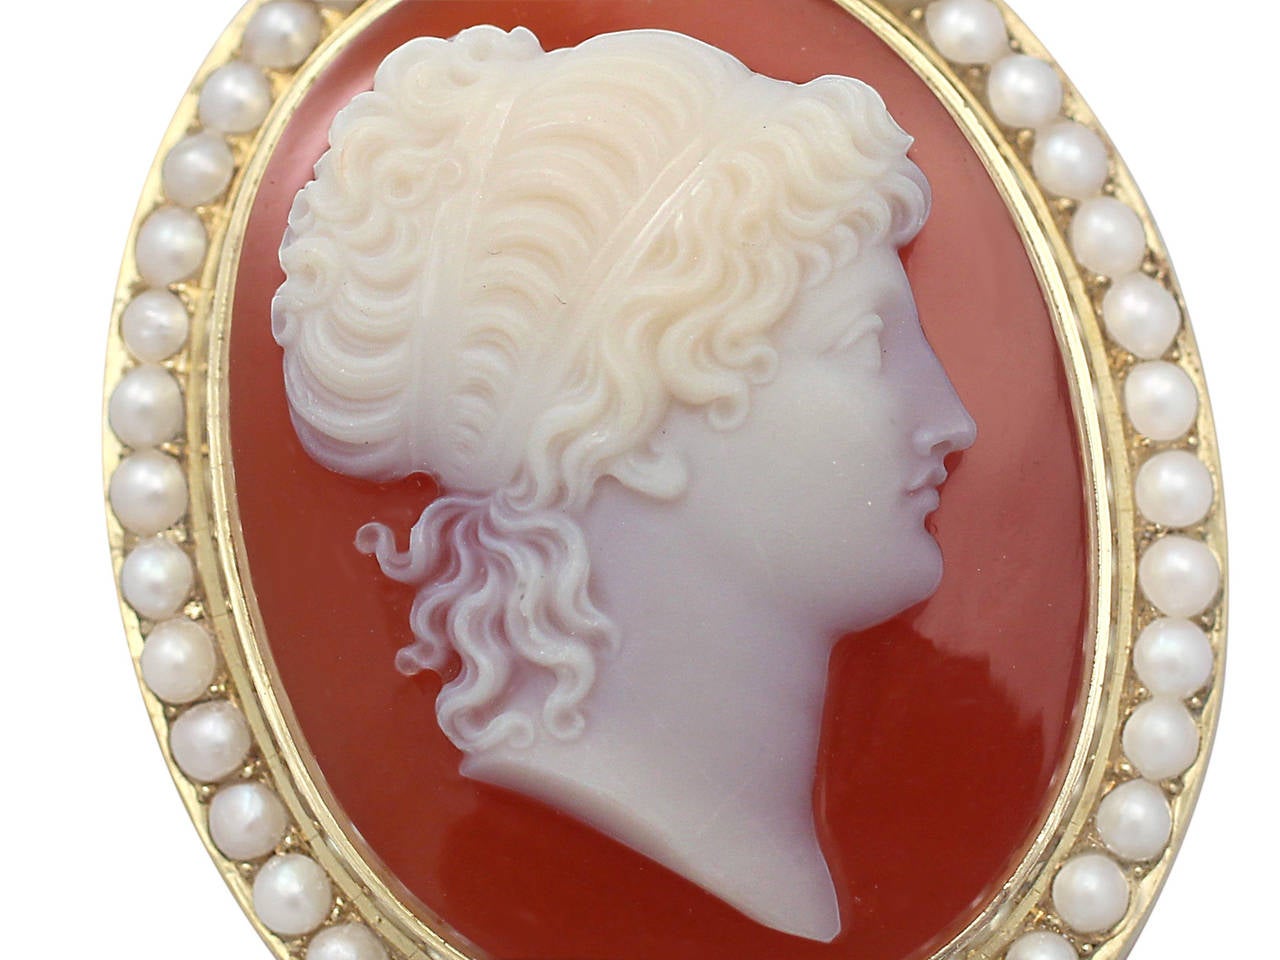 A fine and impressive antique Victorian cameo brooch with pearls, in 15 karat yellow gold; part of our antique jewelry and estate jewelry collections

This fine antique Victorian cameo brooch has been crafted in 15k yellow gold.

The cameo is bezel